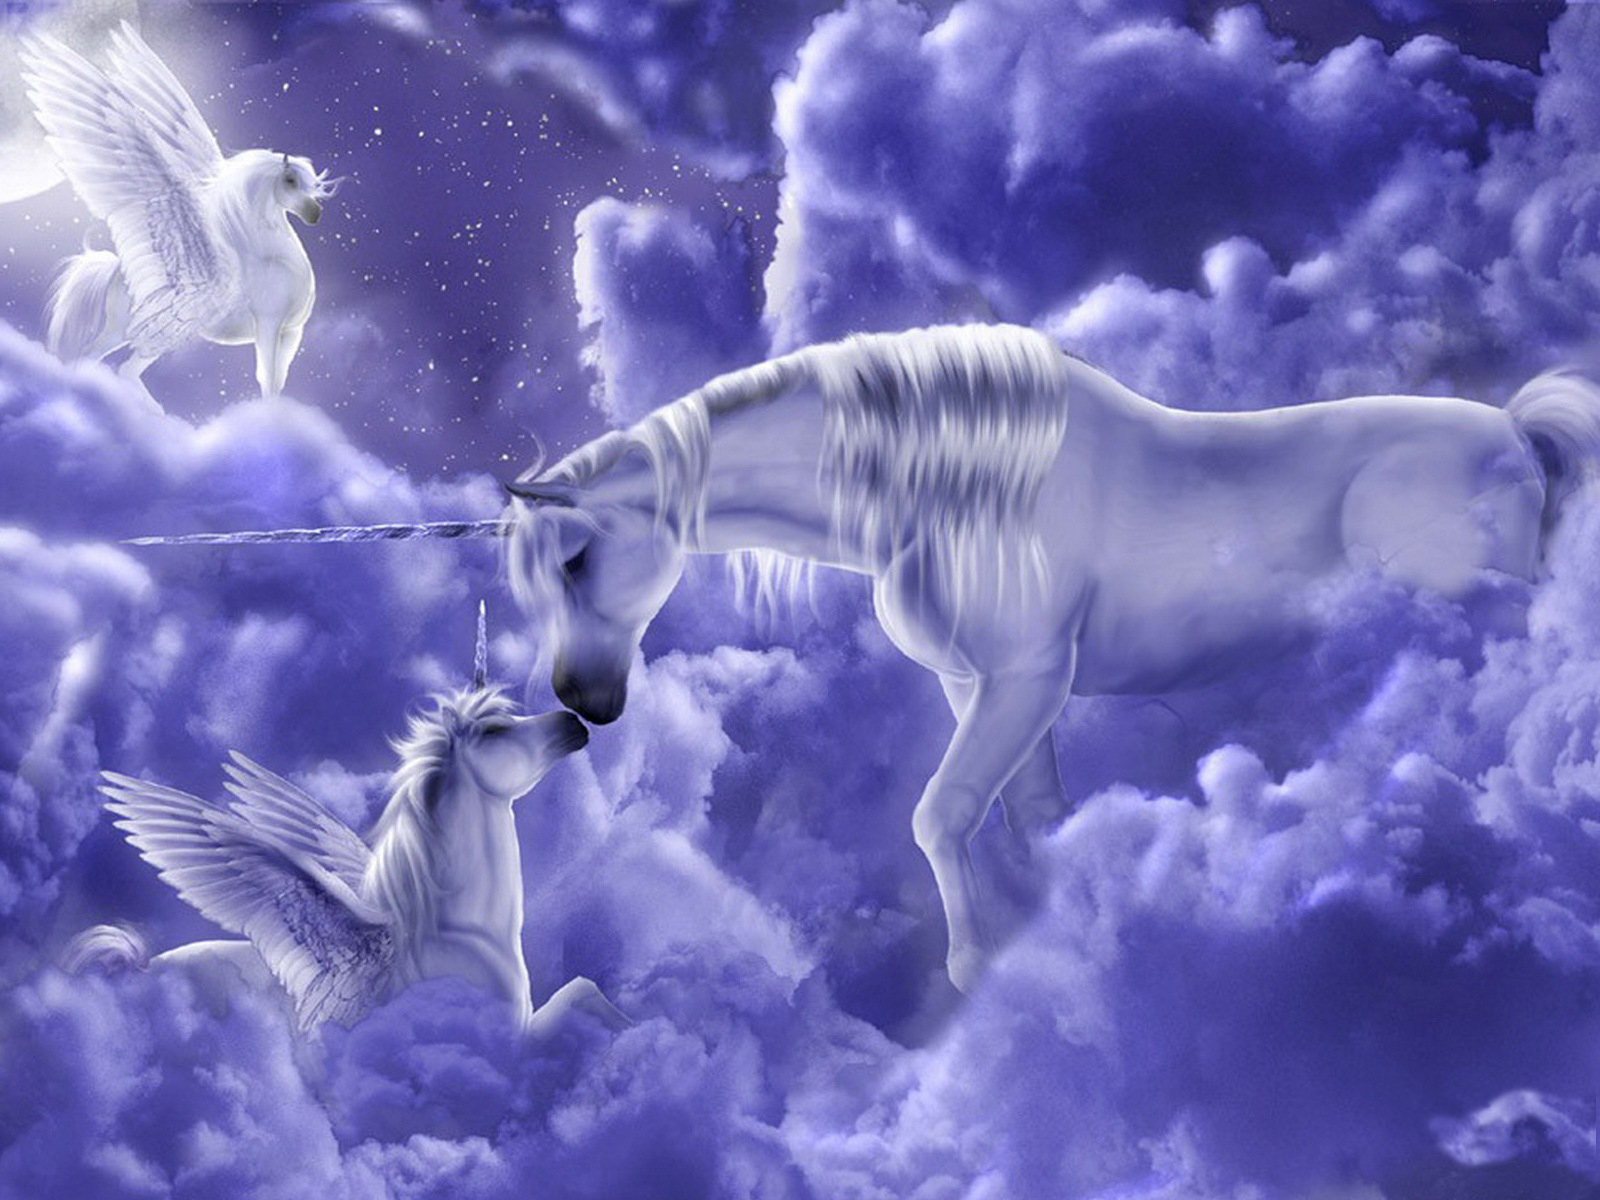 Look What I Just Found!! Beautiful_Fantasy_%20Purple_Wallpaper_with_Unicorns_in_Clouds